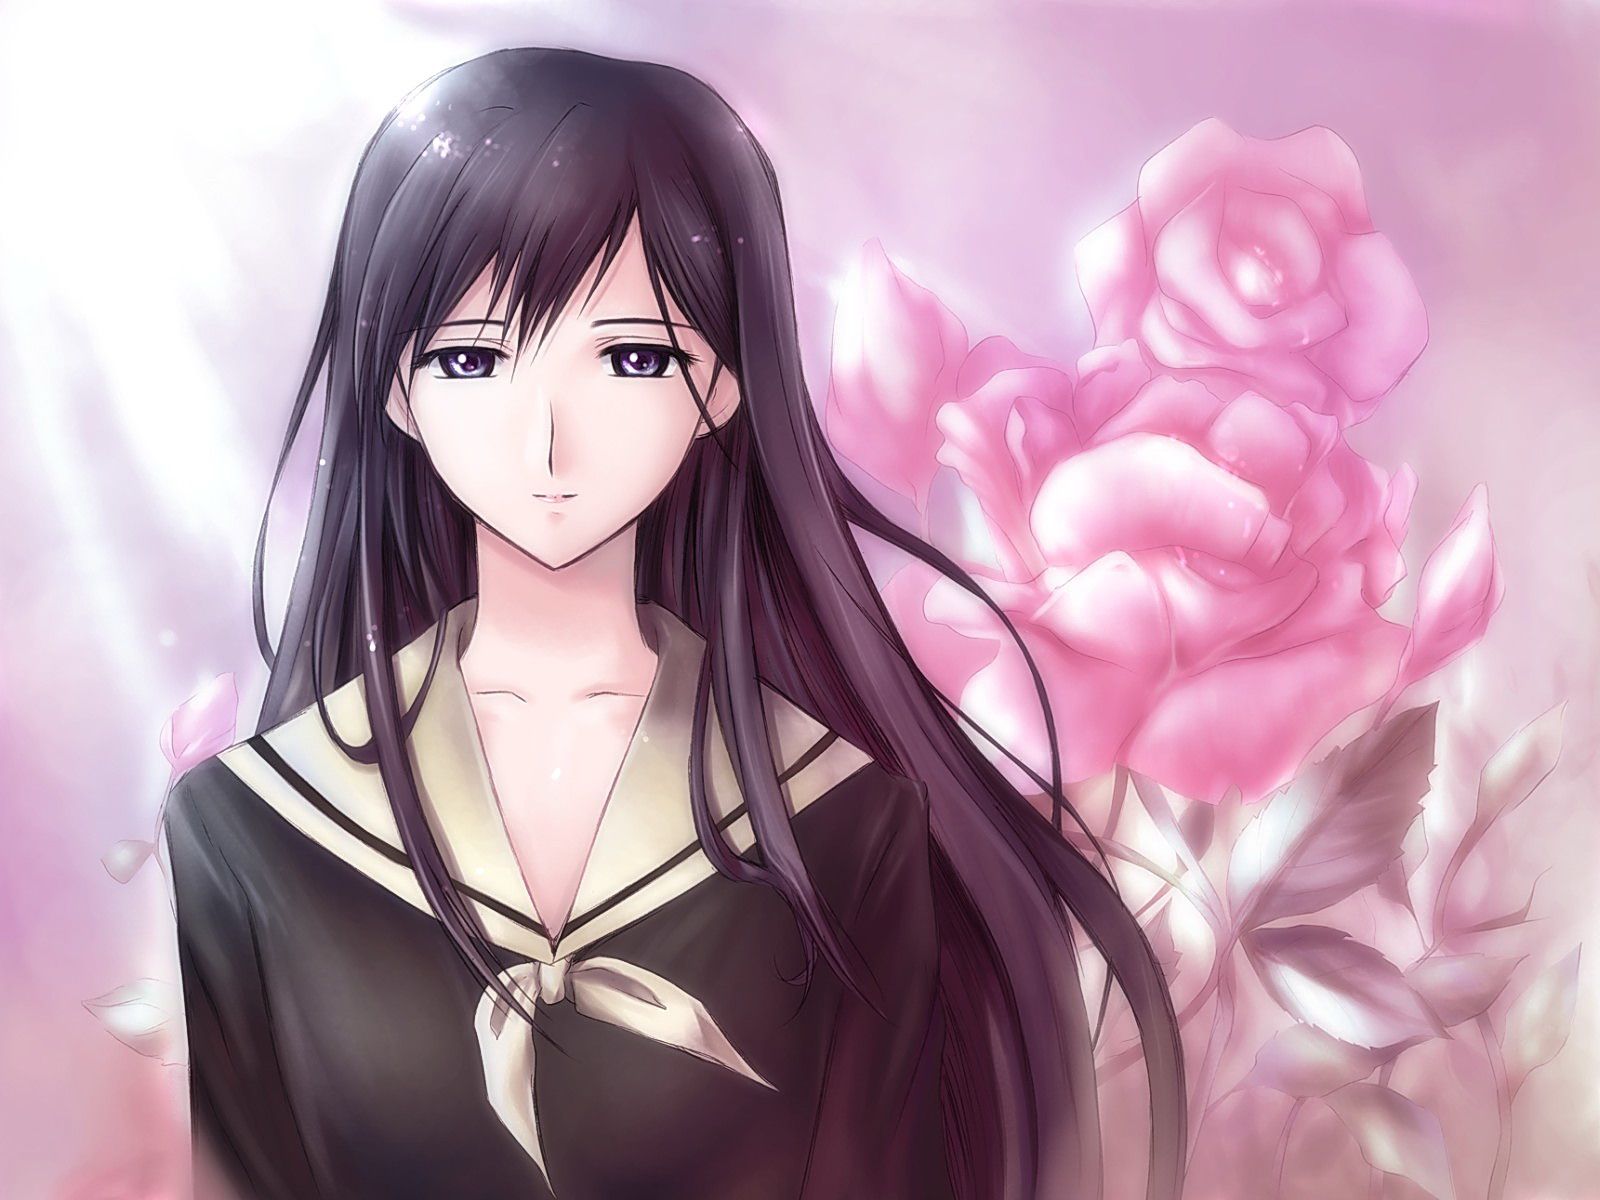 Wallpapers Maria Holic Anime Image Download